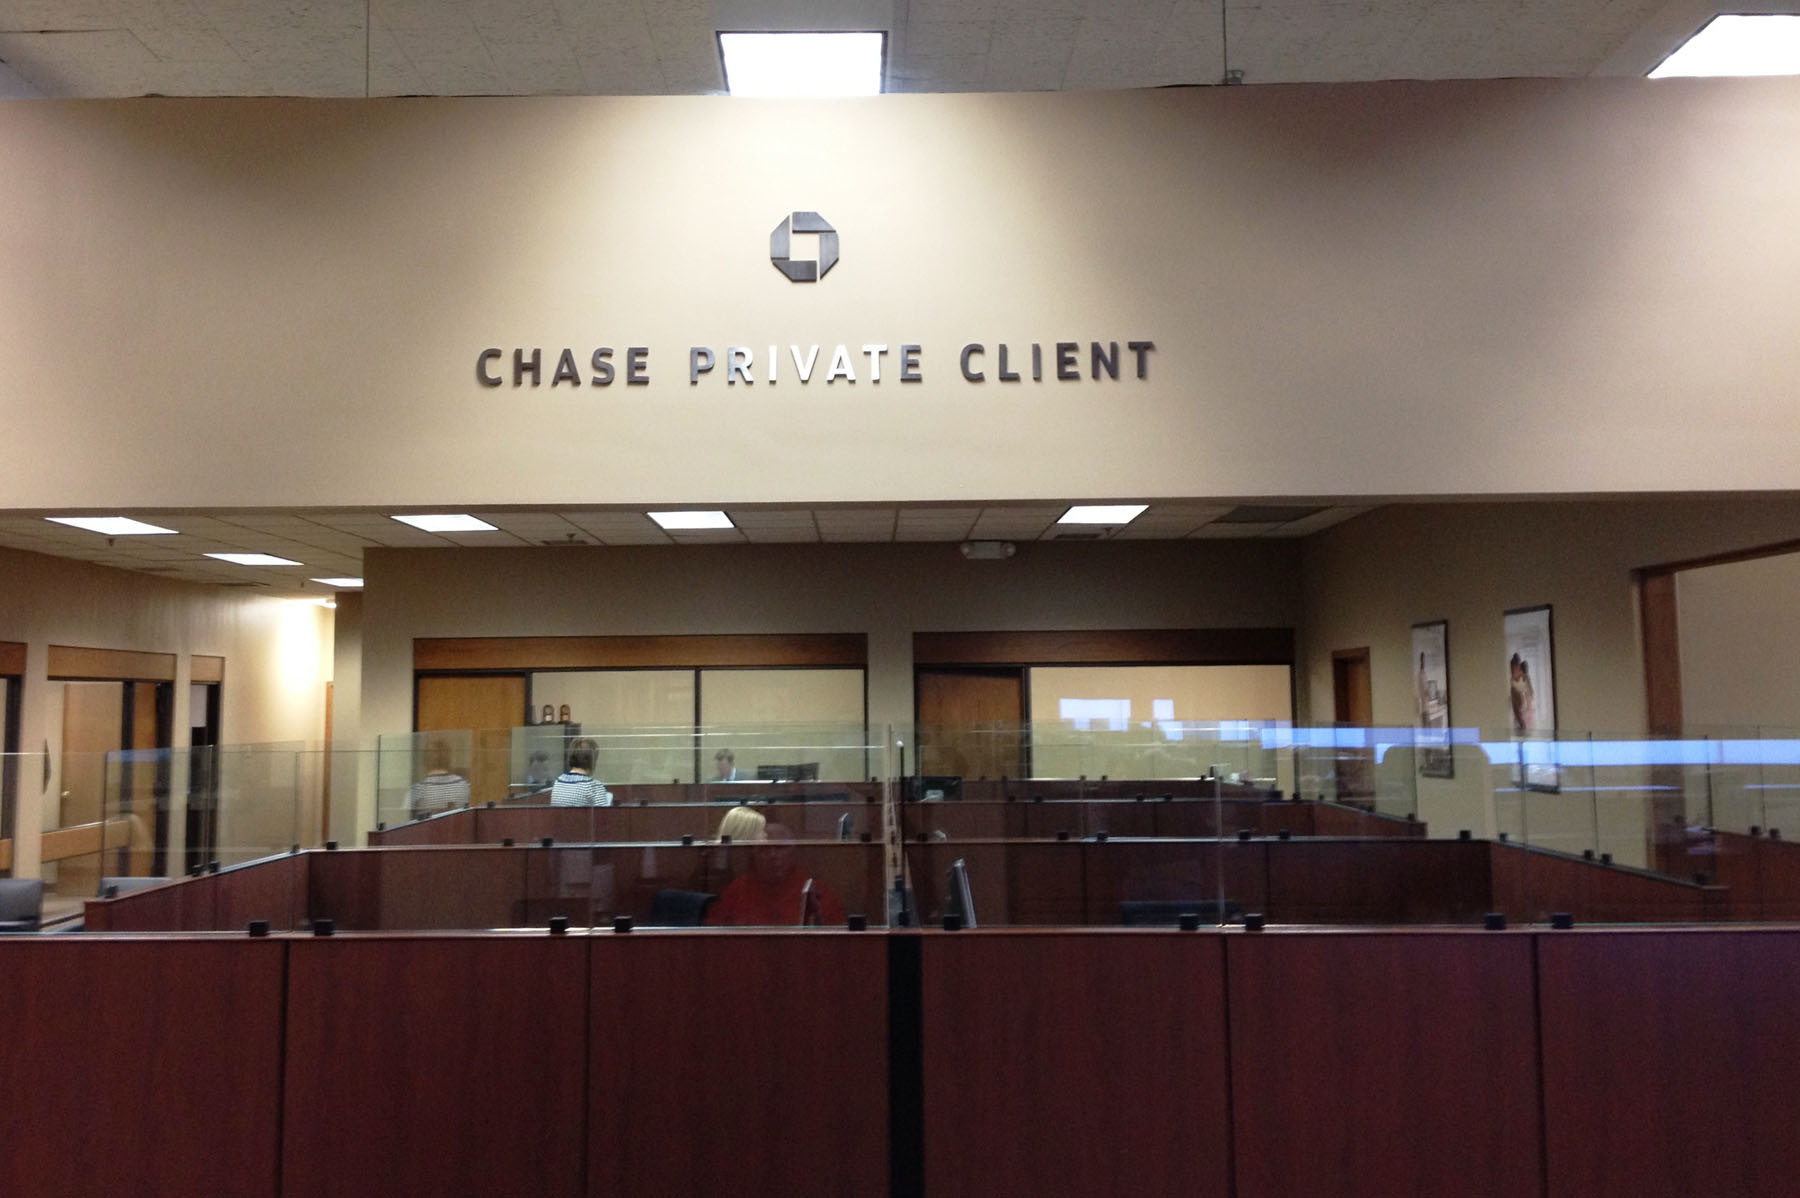 Chase Private Client Cubicles Gold Interior Letters